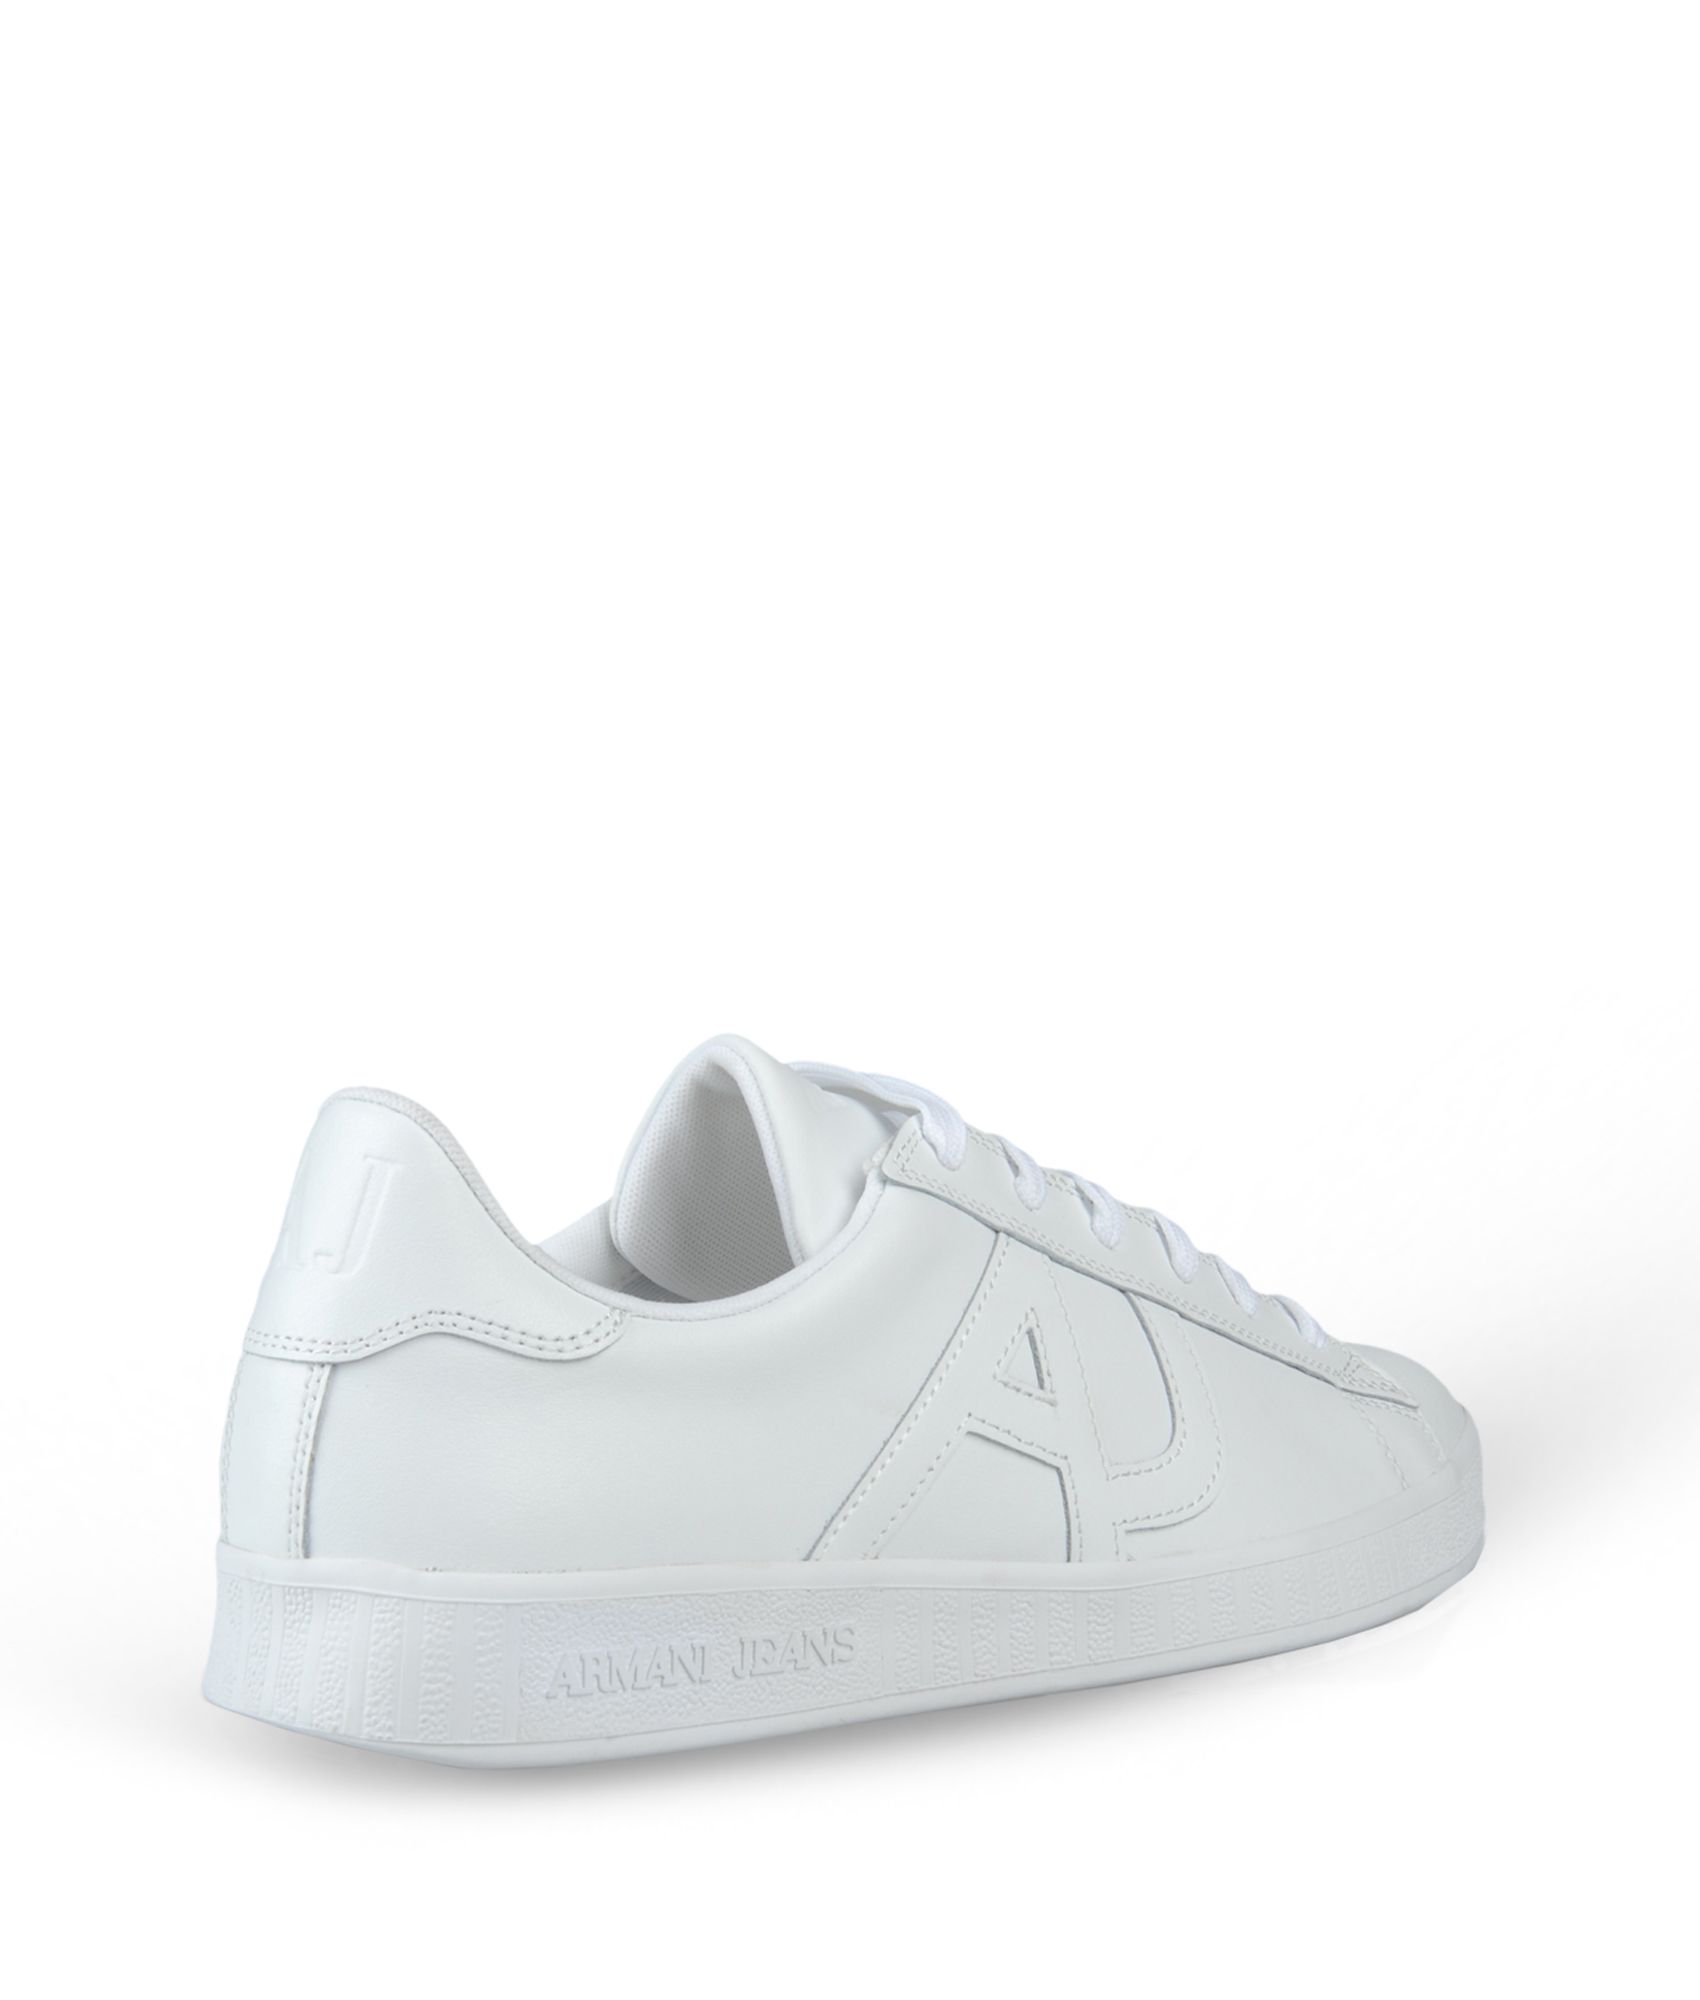 Lyst - Armani Jeans Sneaker In Leather With Logo in White for Men